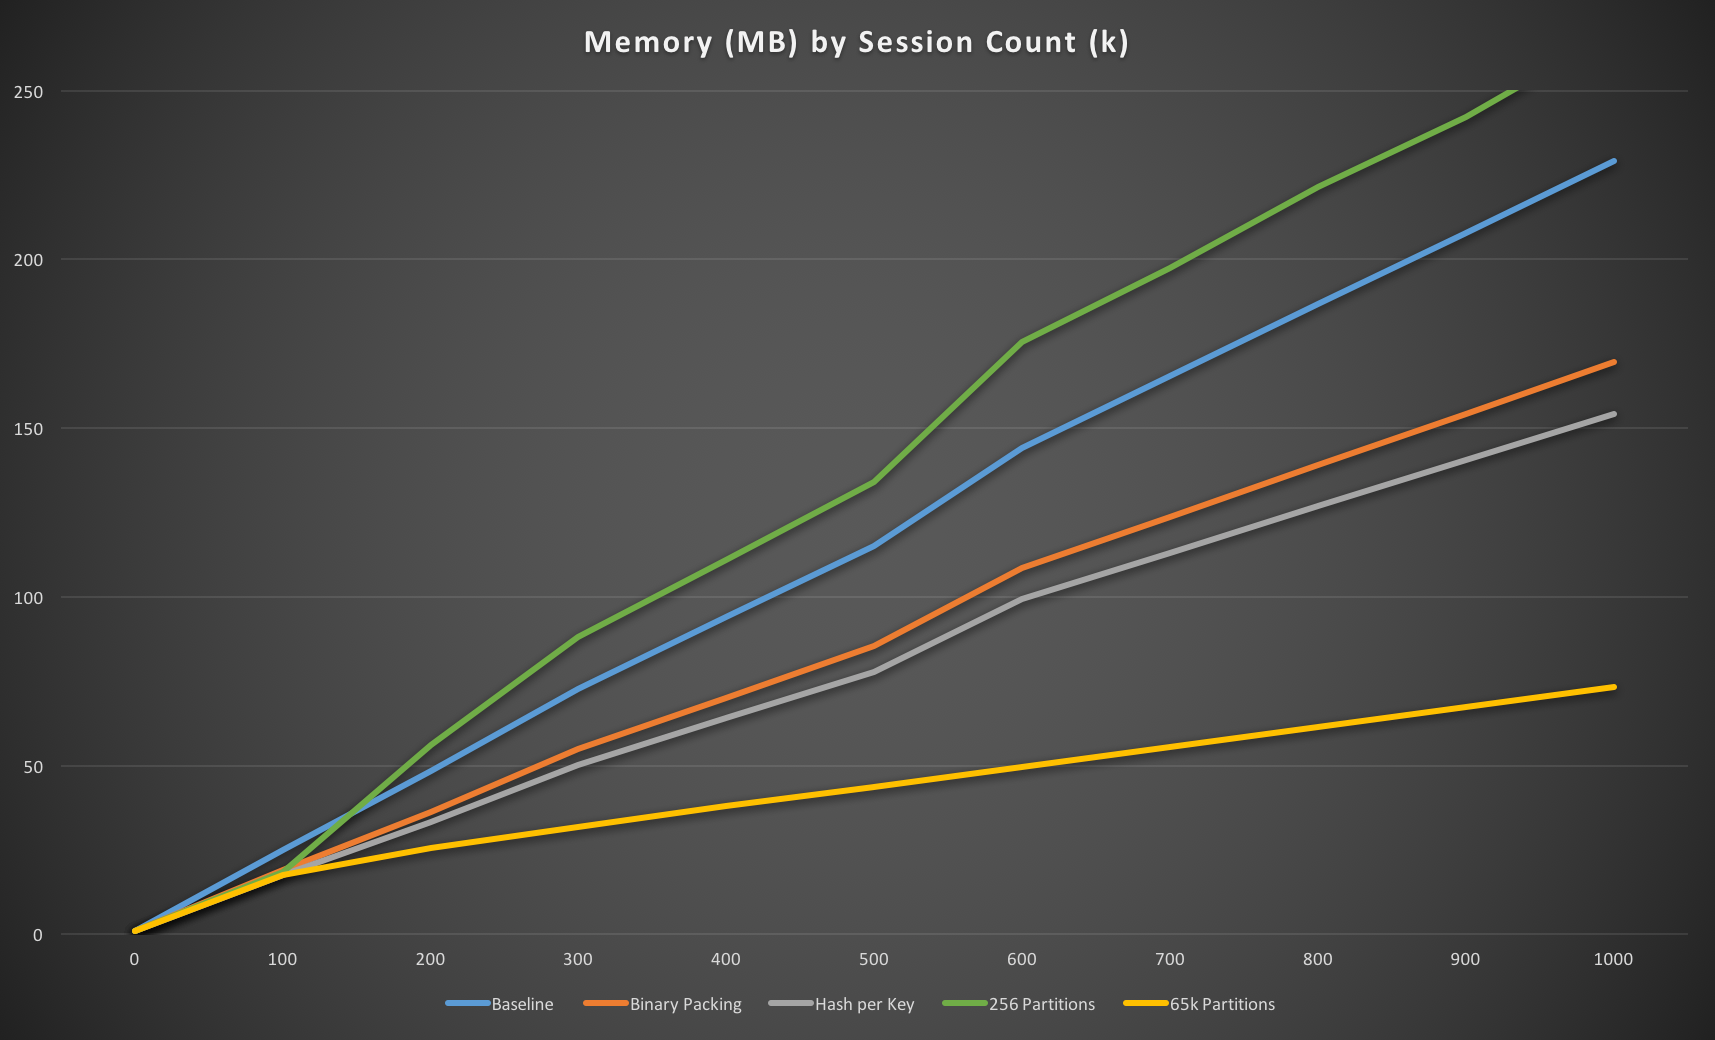 65k partitions memory usage